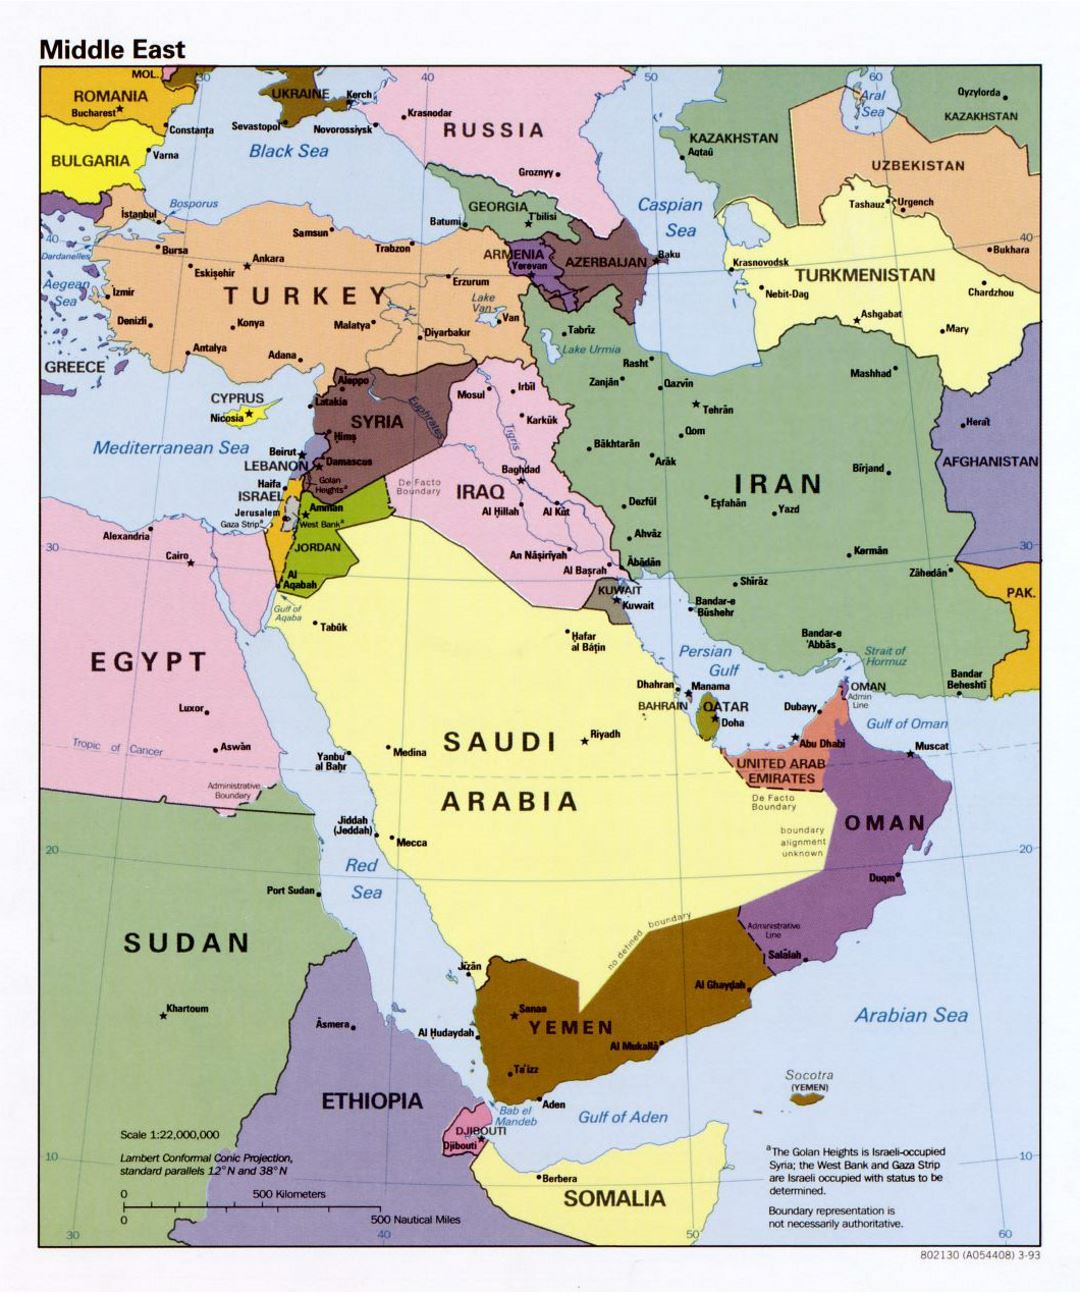 Detailed political map of the Middle East - 1993